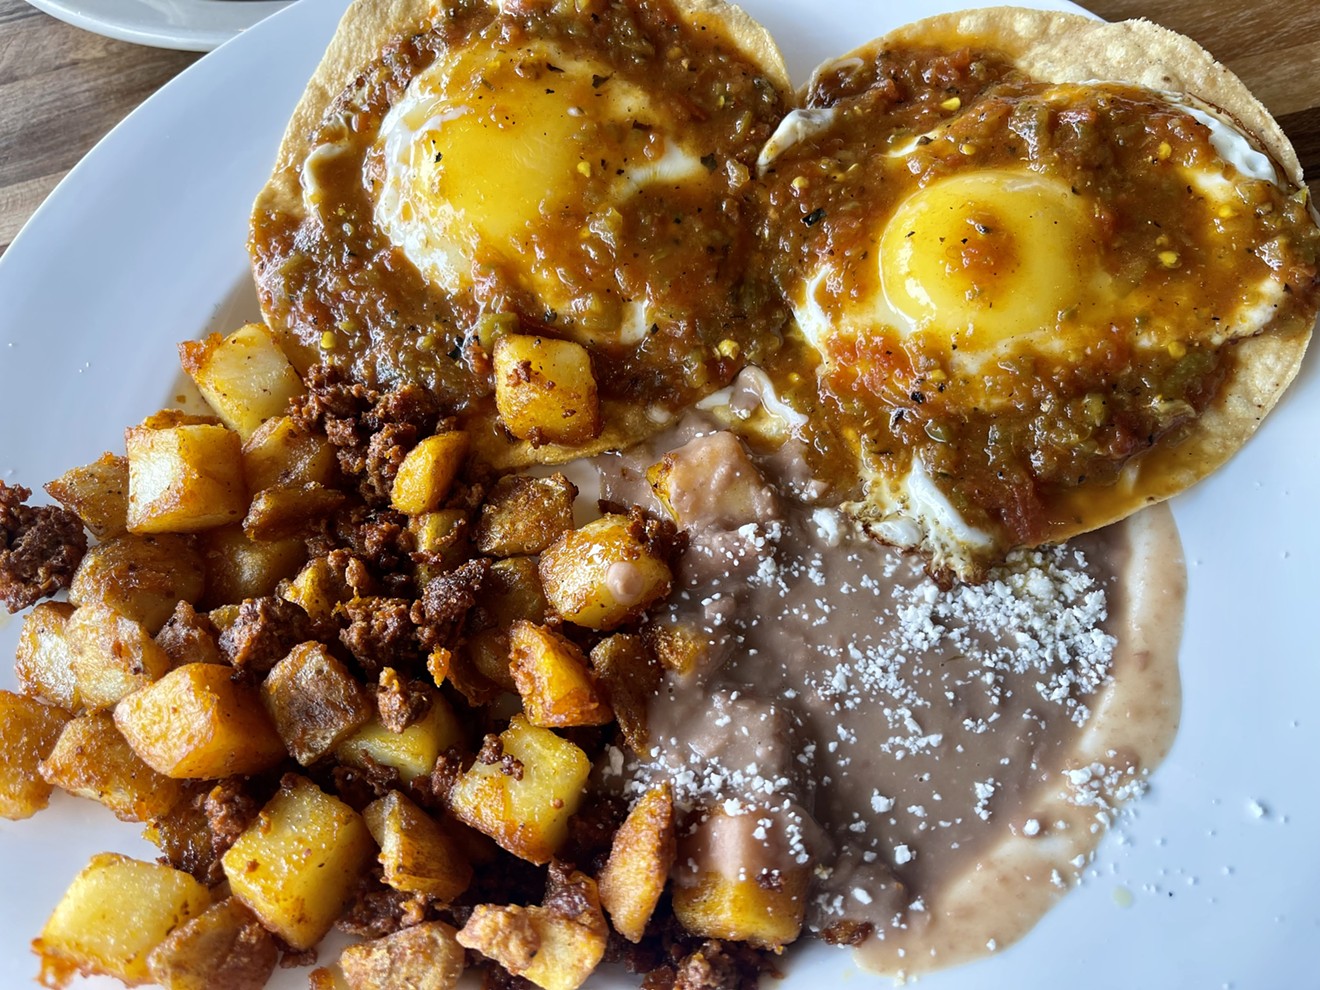 The huevos rancheros at Presidio Cocina Mexicana are a hearty and flavorful way to start your day.